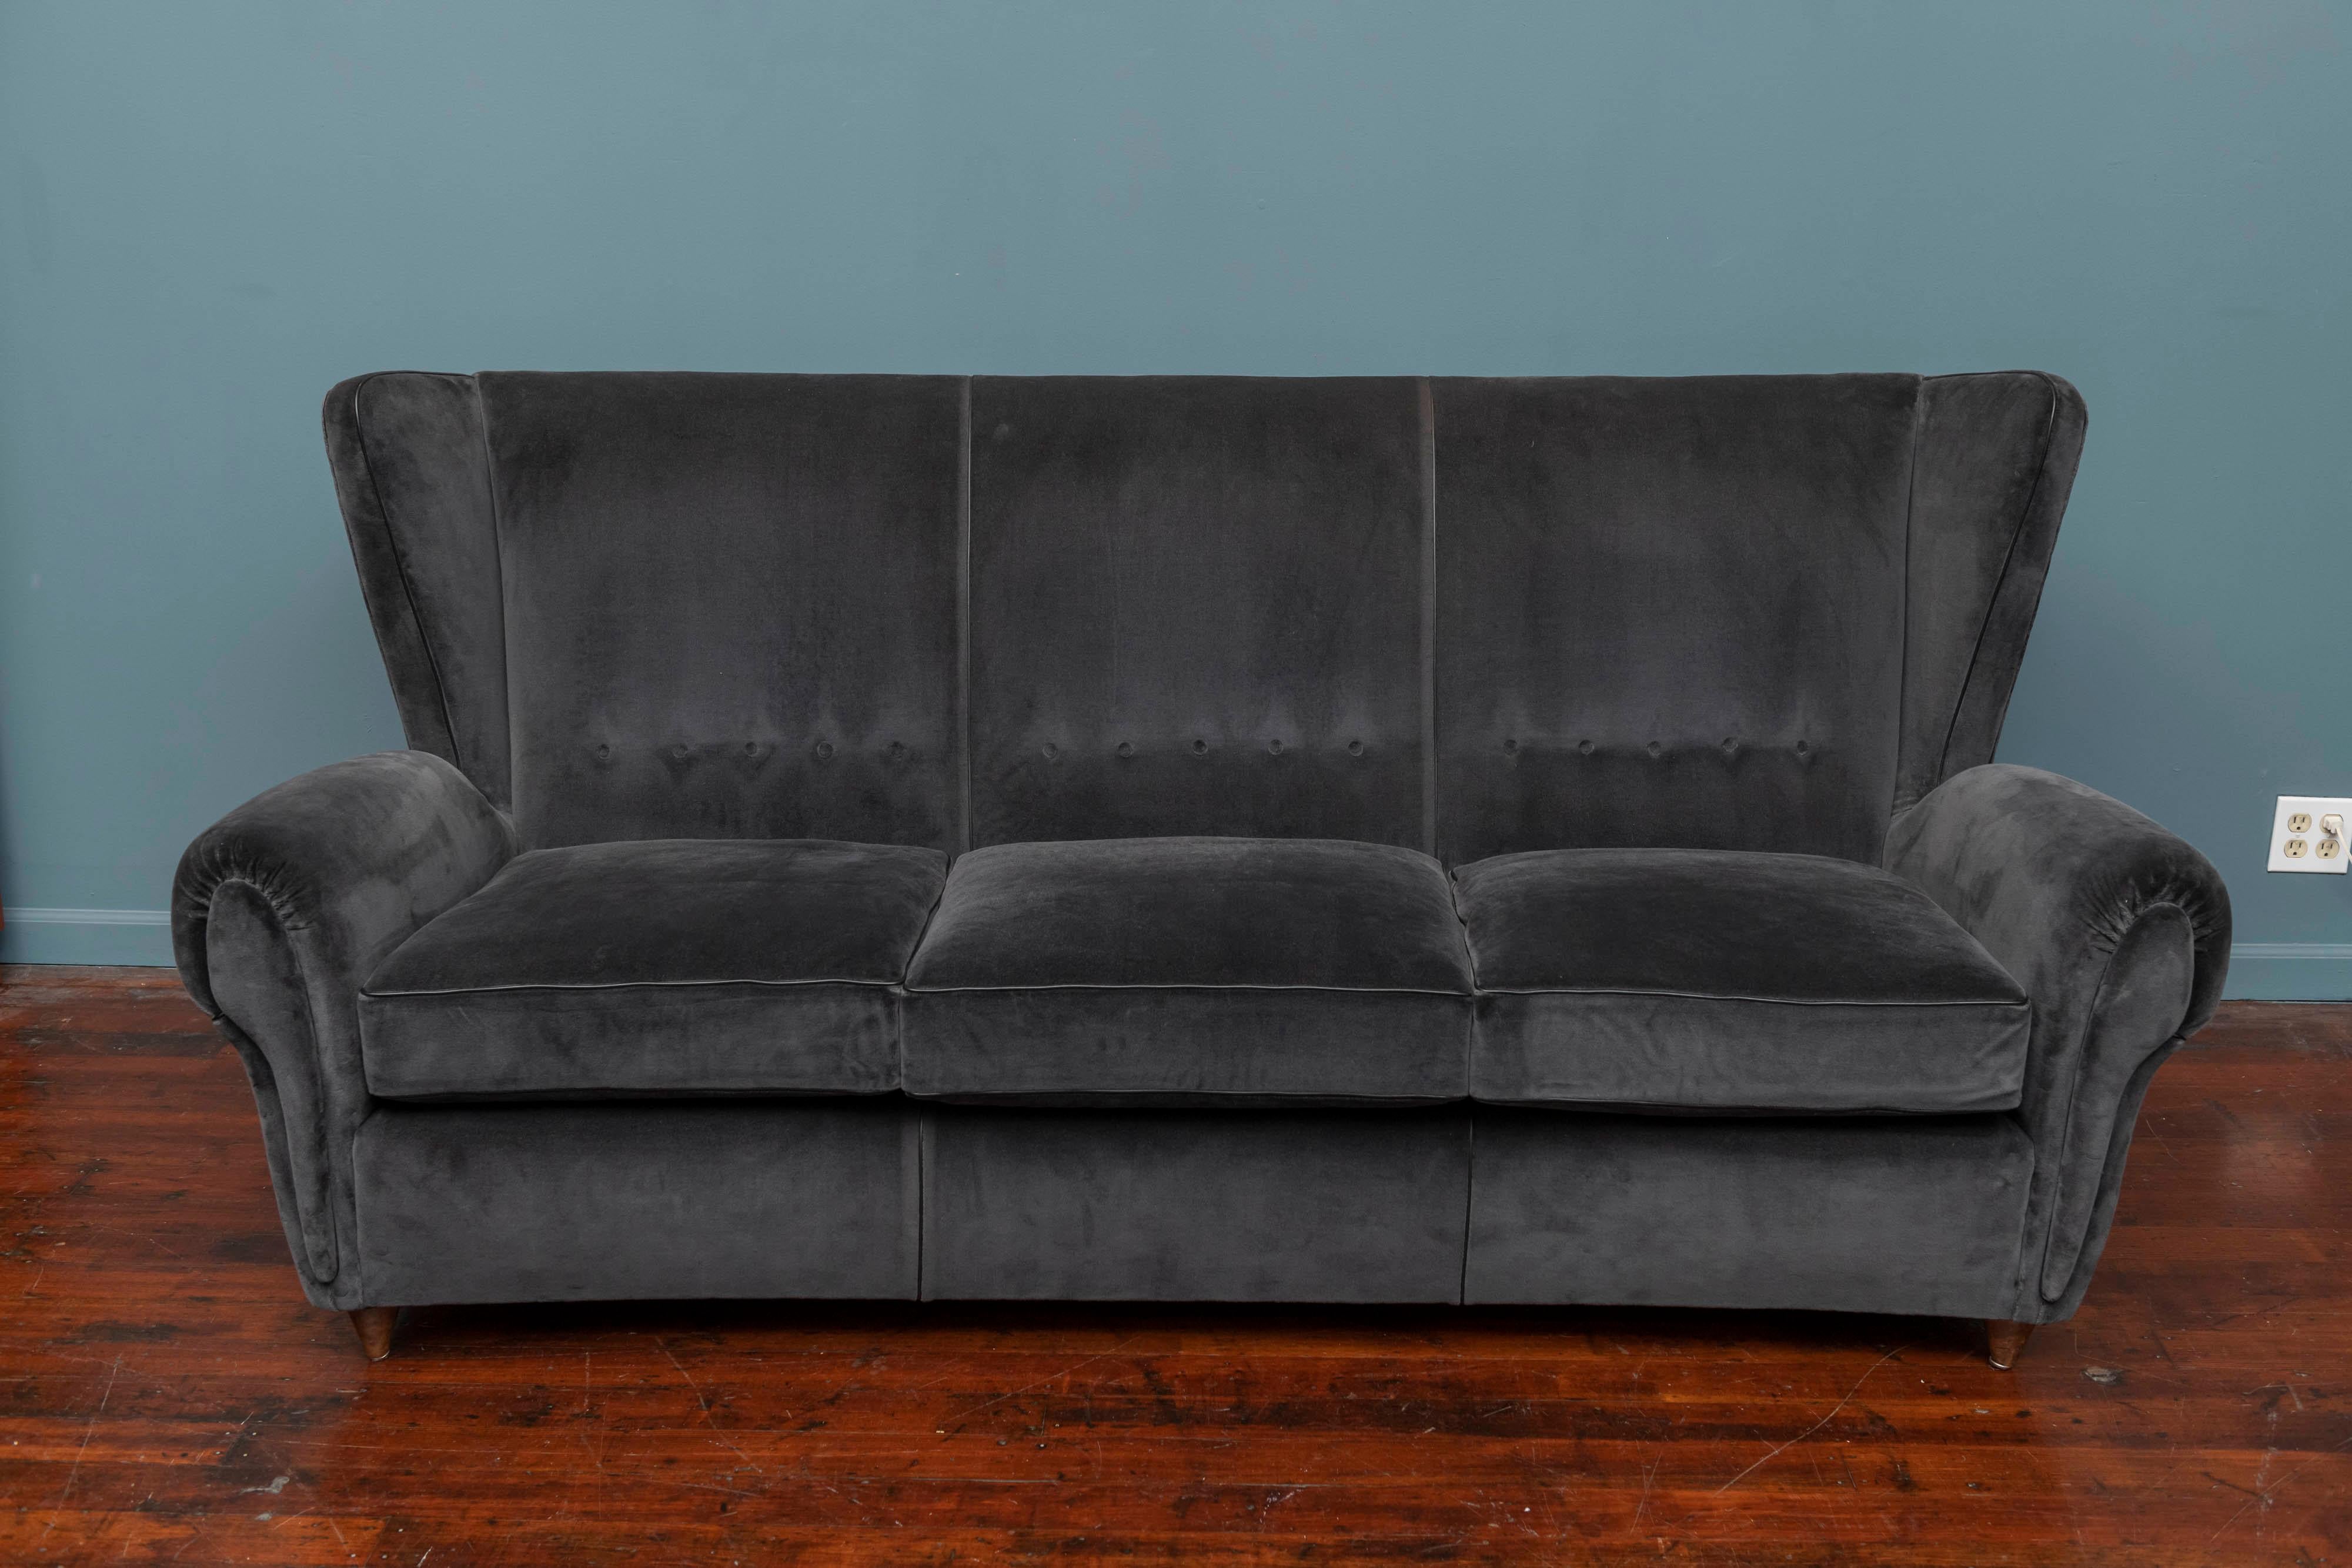 Mid-Century Modern Italian wingback sofa, upholstered in charcoal mohair with black leather piping. Completely restored and ready to install, very comfortable.